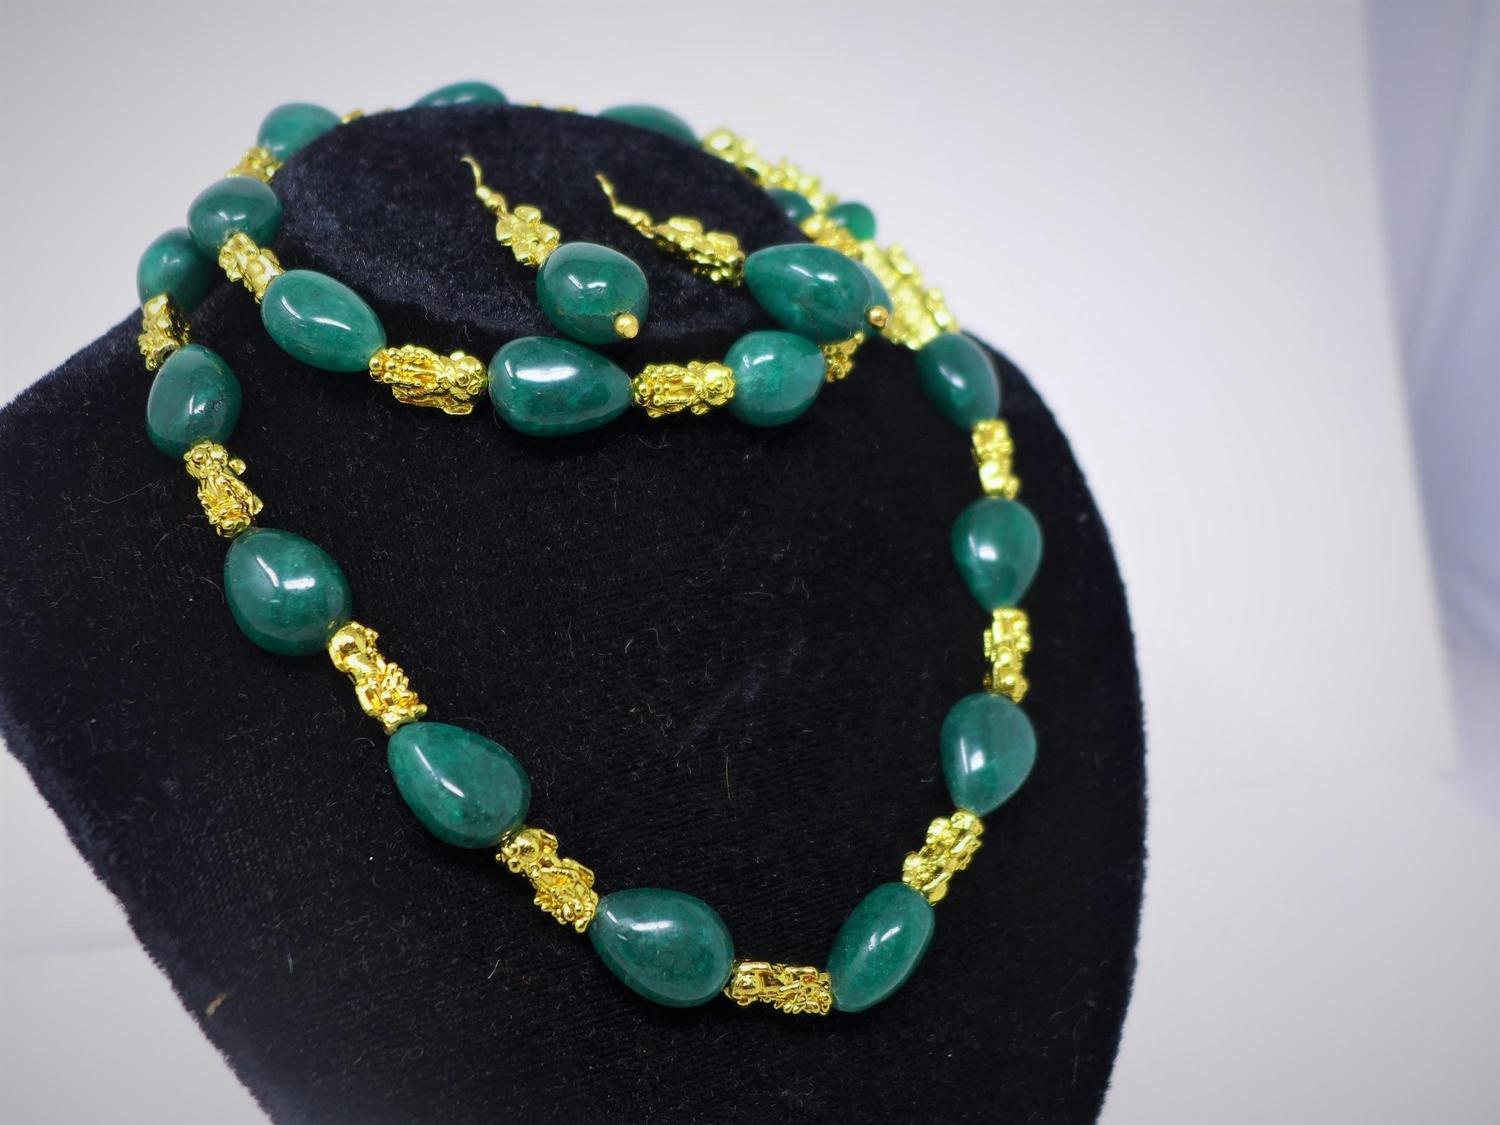 An emerald necklace with gilt metal dogs of Fo, together with matching earrings